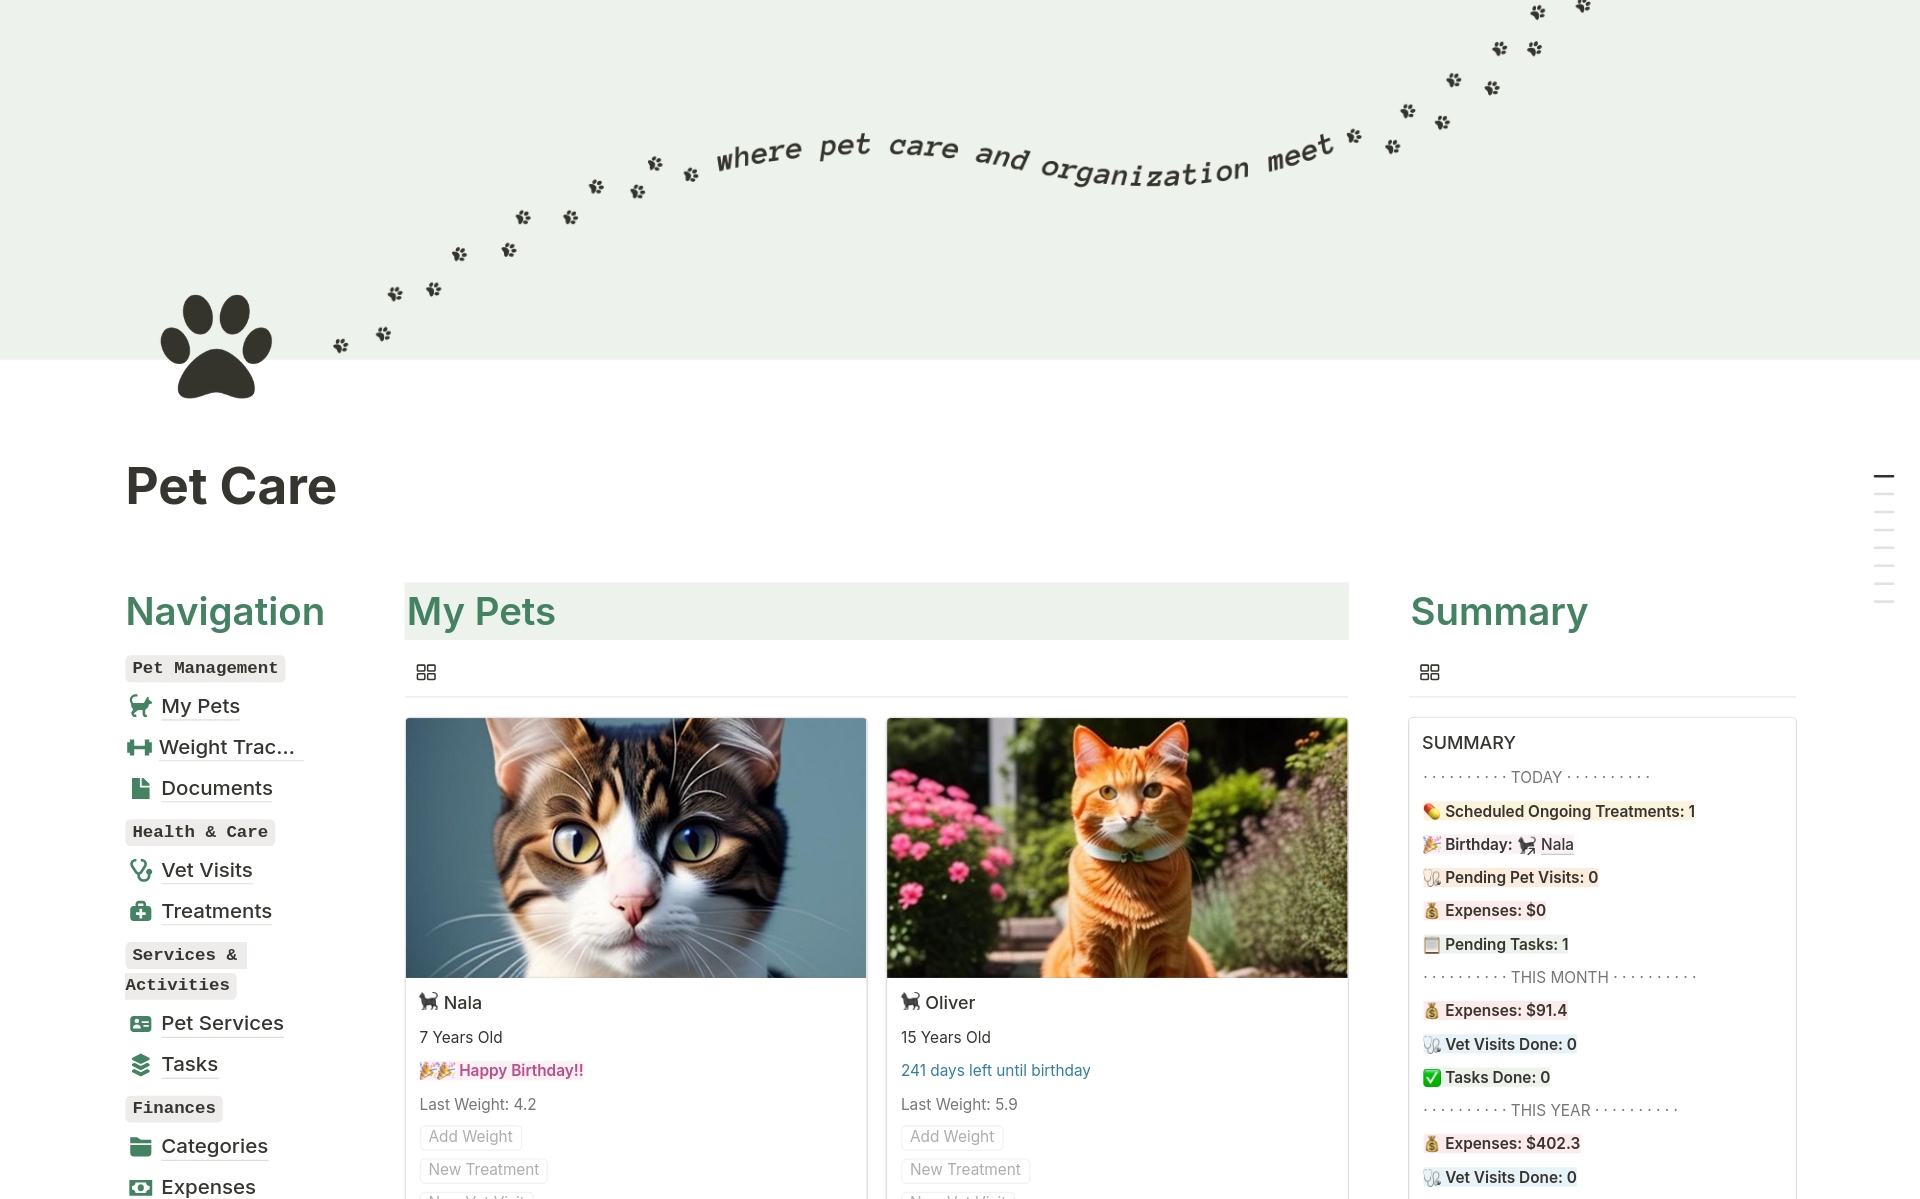 This template helps you organize and control your pet's life. It manages all aspects related to your pet, from vet appointments to expenses, treatments, and more.